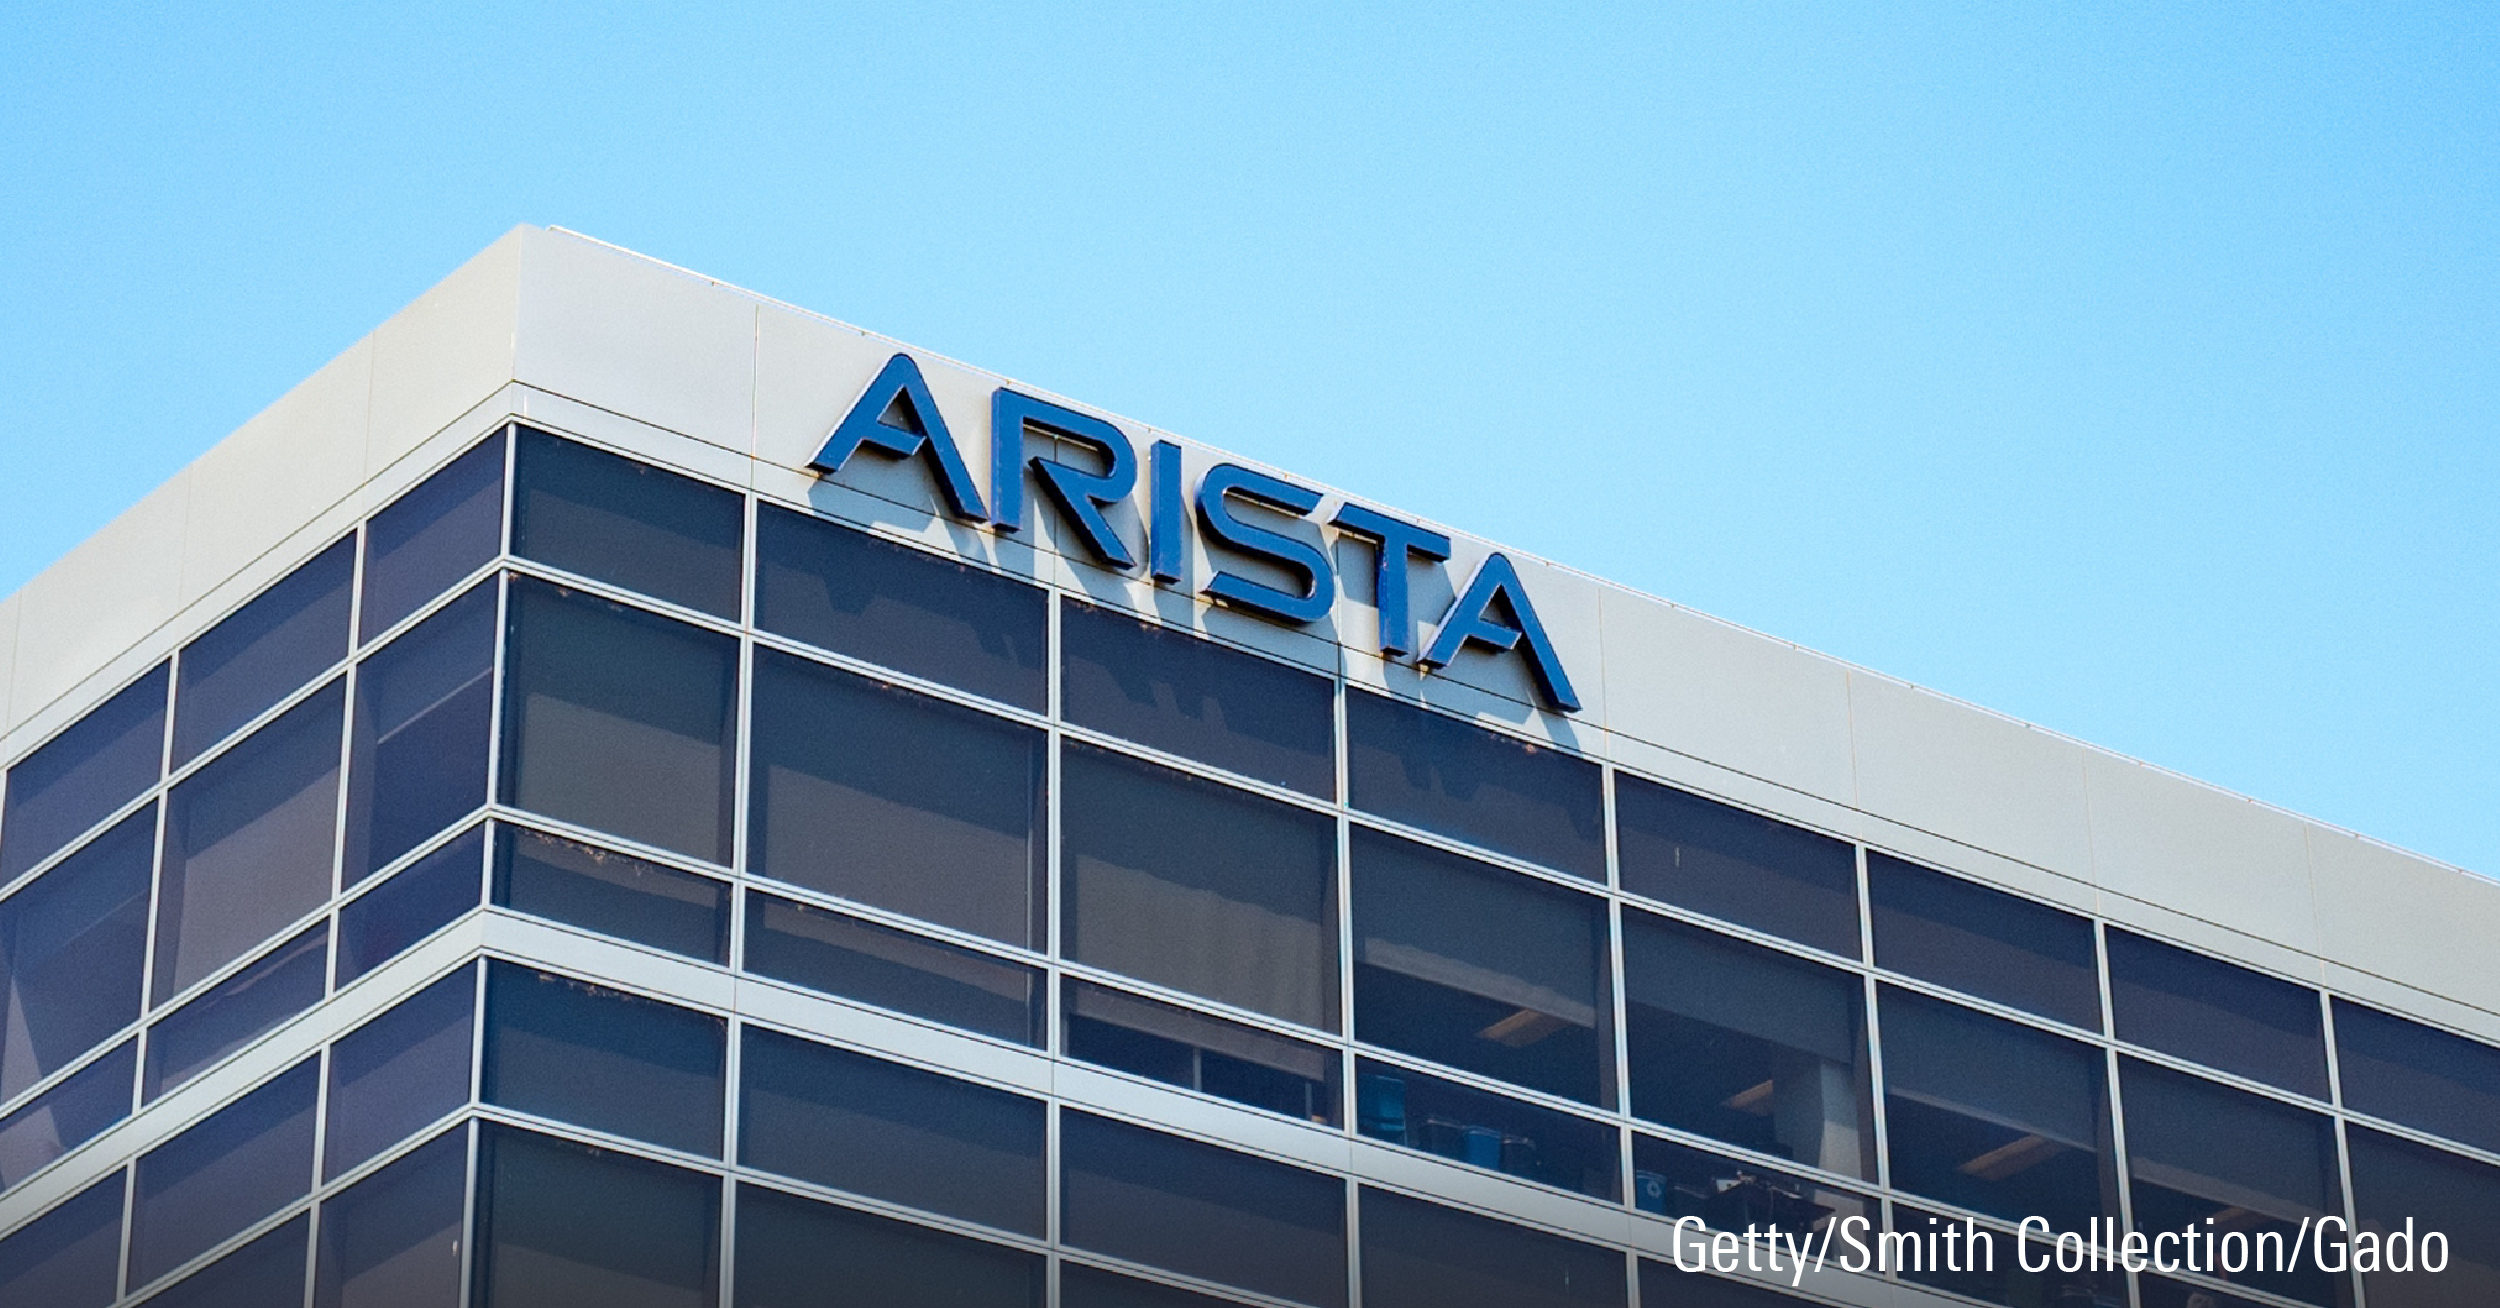 Facade of headquarters with logo and signage for cloud networking company Arista in the Silicon Valley town of Santa Clara, California, July 25, 2017.